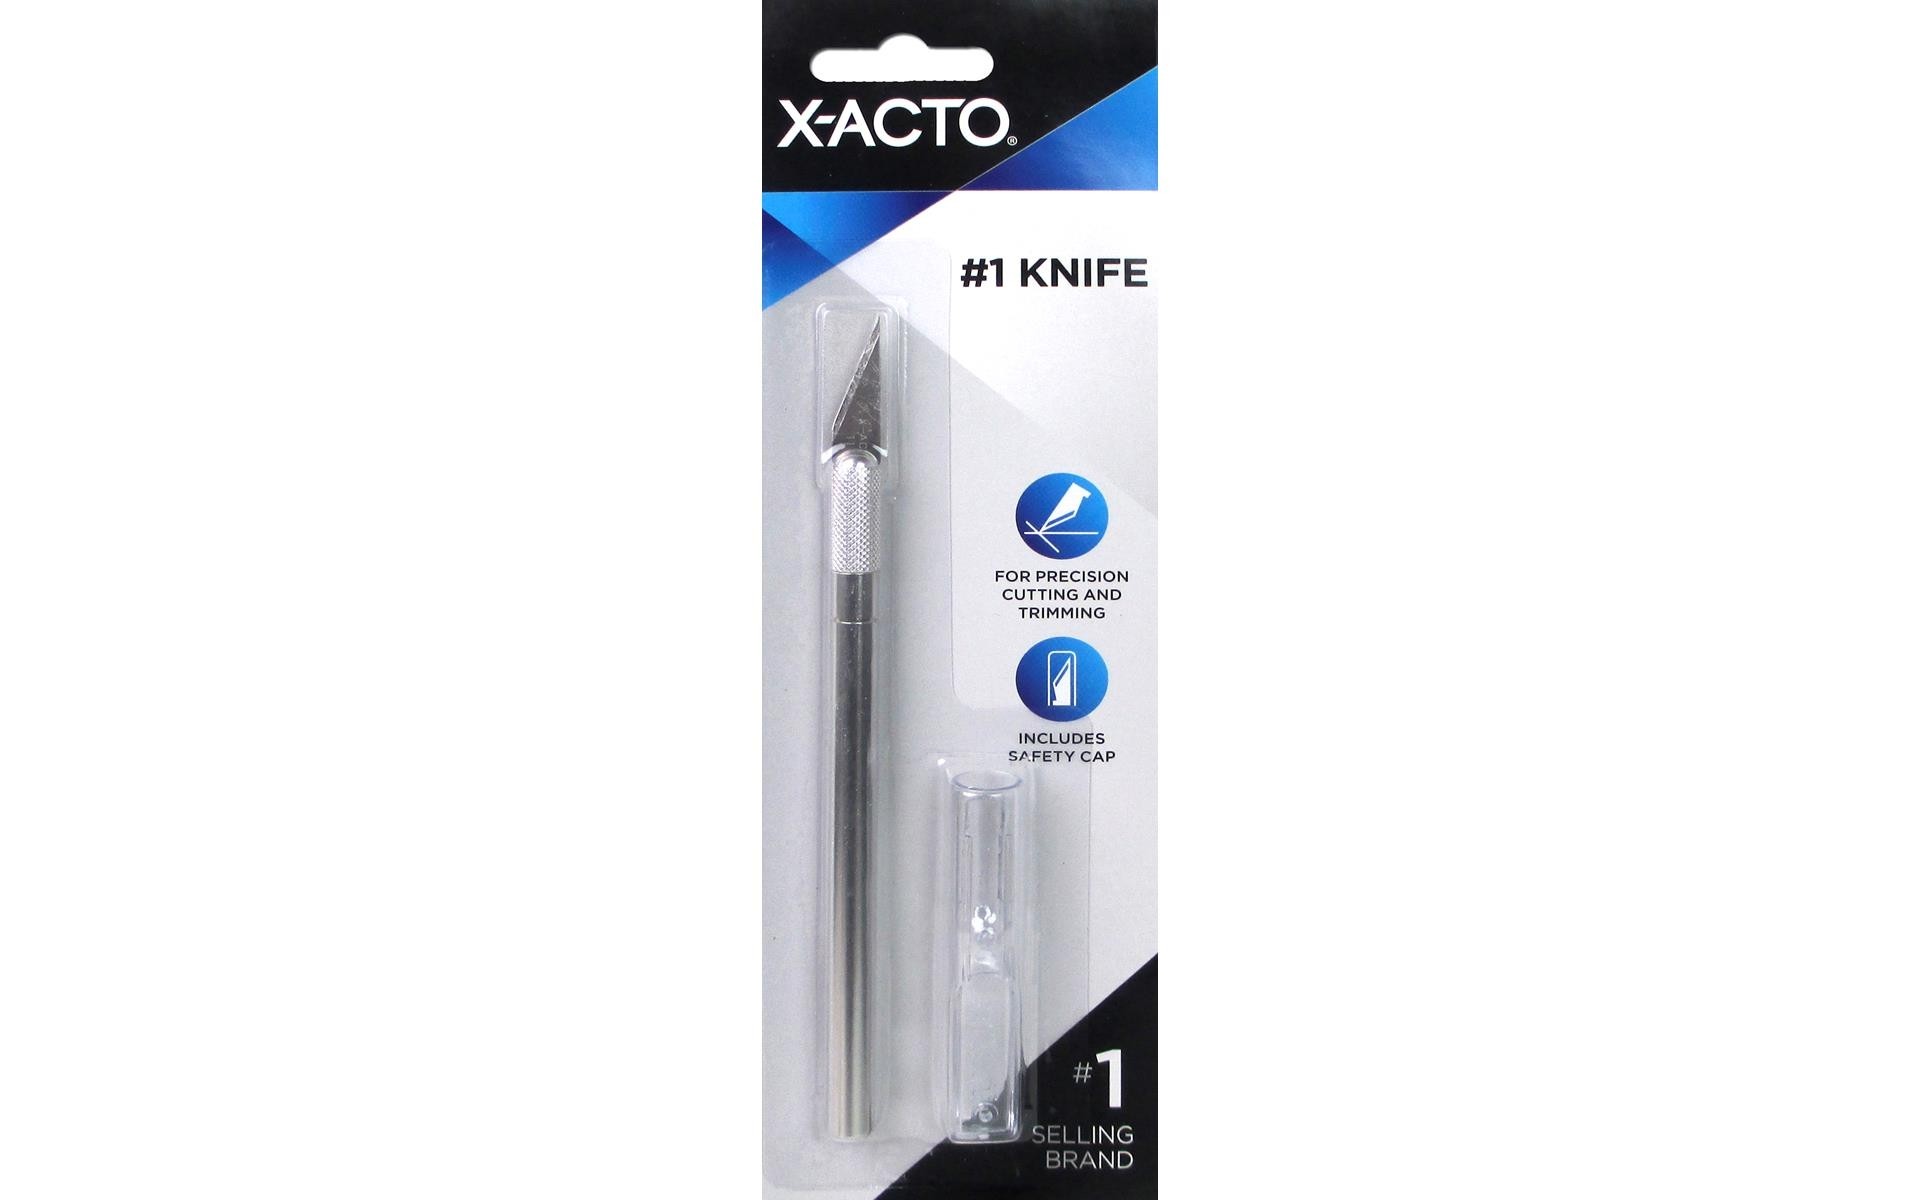 X-Acto Knife #1 with Safety Cap